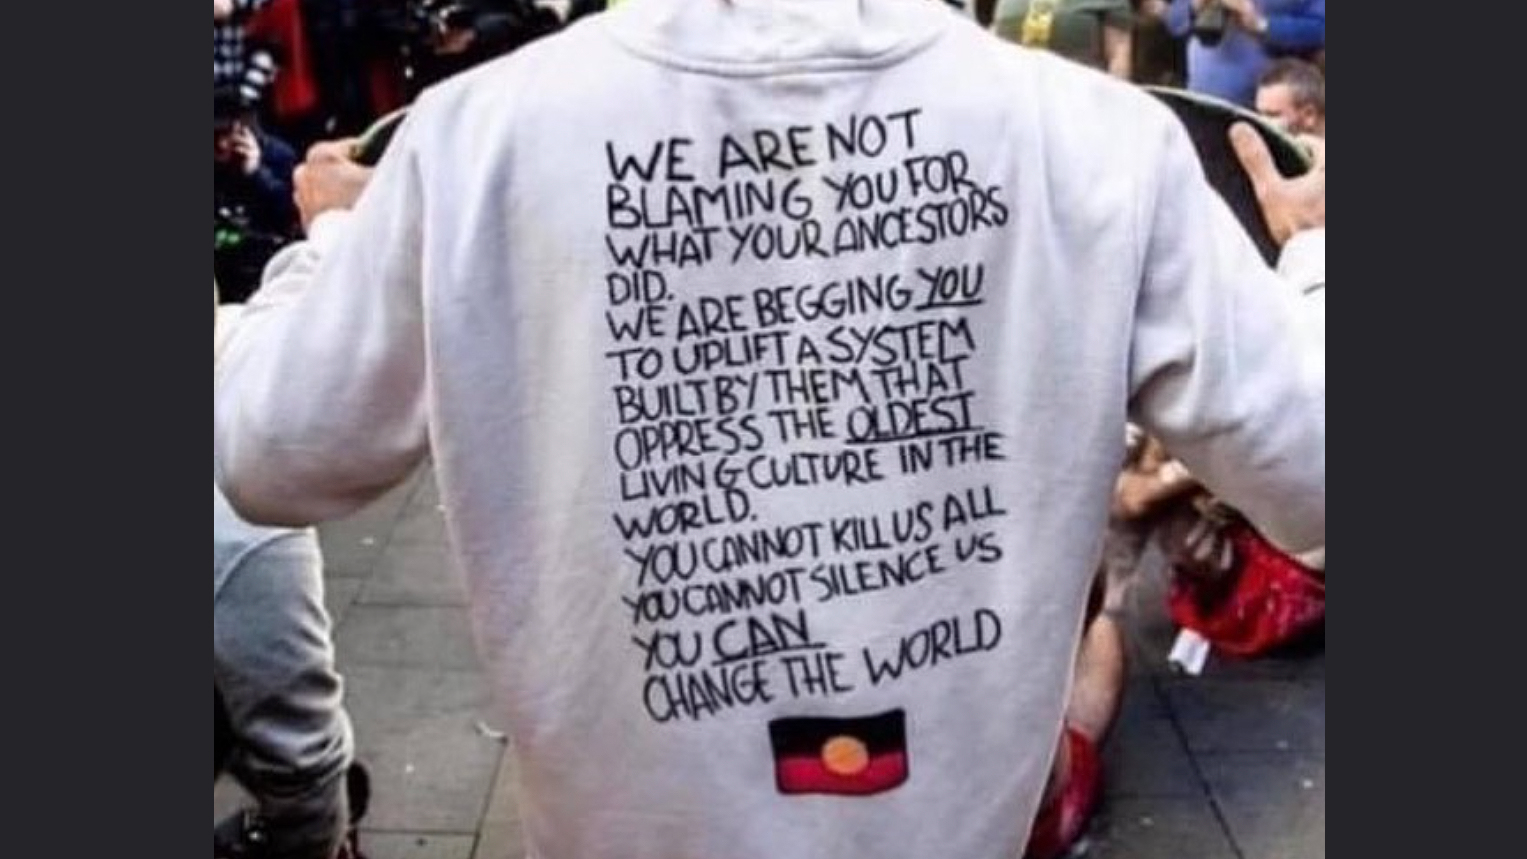 Photograph of protestor's torso from the back. They are wearing a hoodie that says "We are not blaming you for what your ancestors did. We are begging you to uplift a system built by them that oppress the oldest living culture in the world. You can not kill us all. You can not silence us. You can change the world.